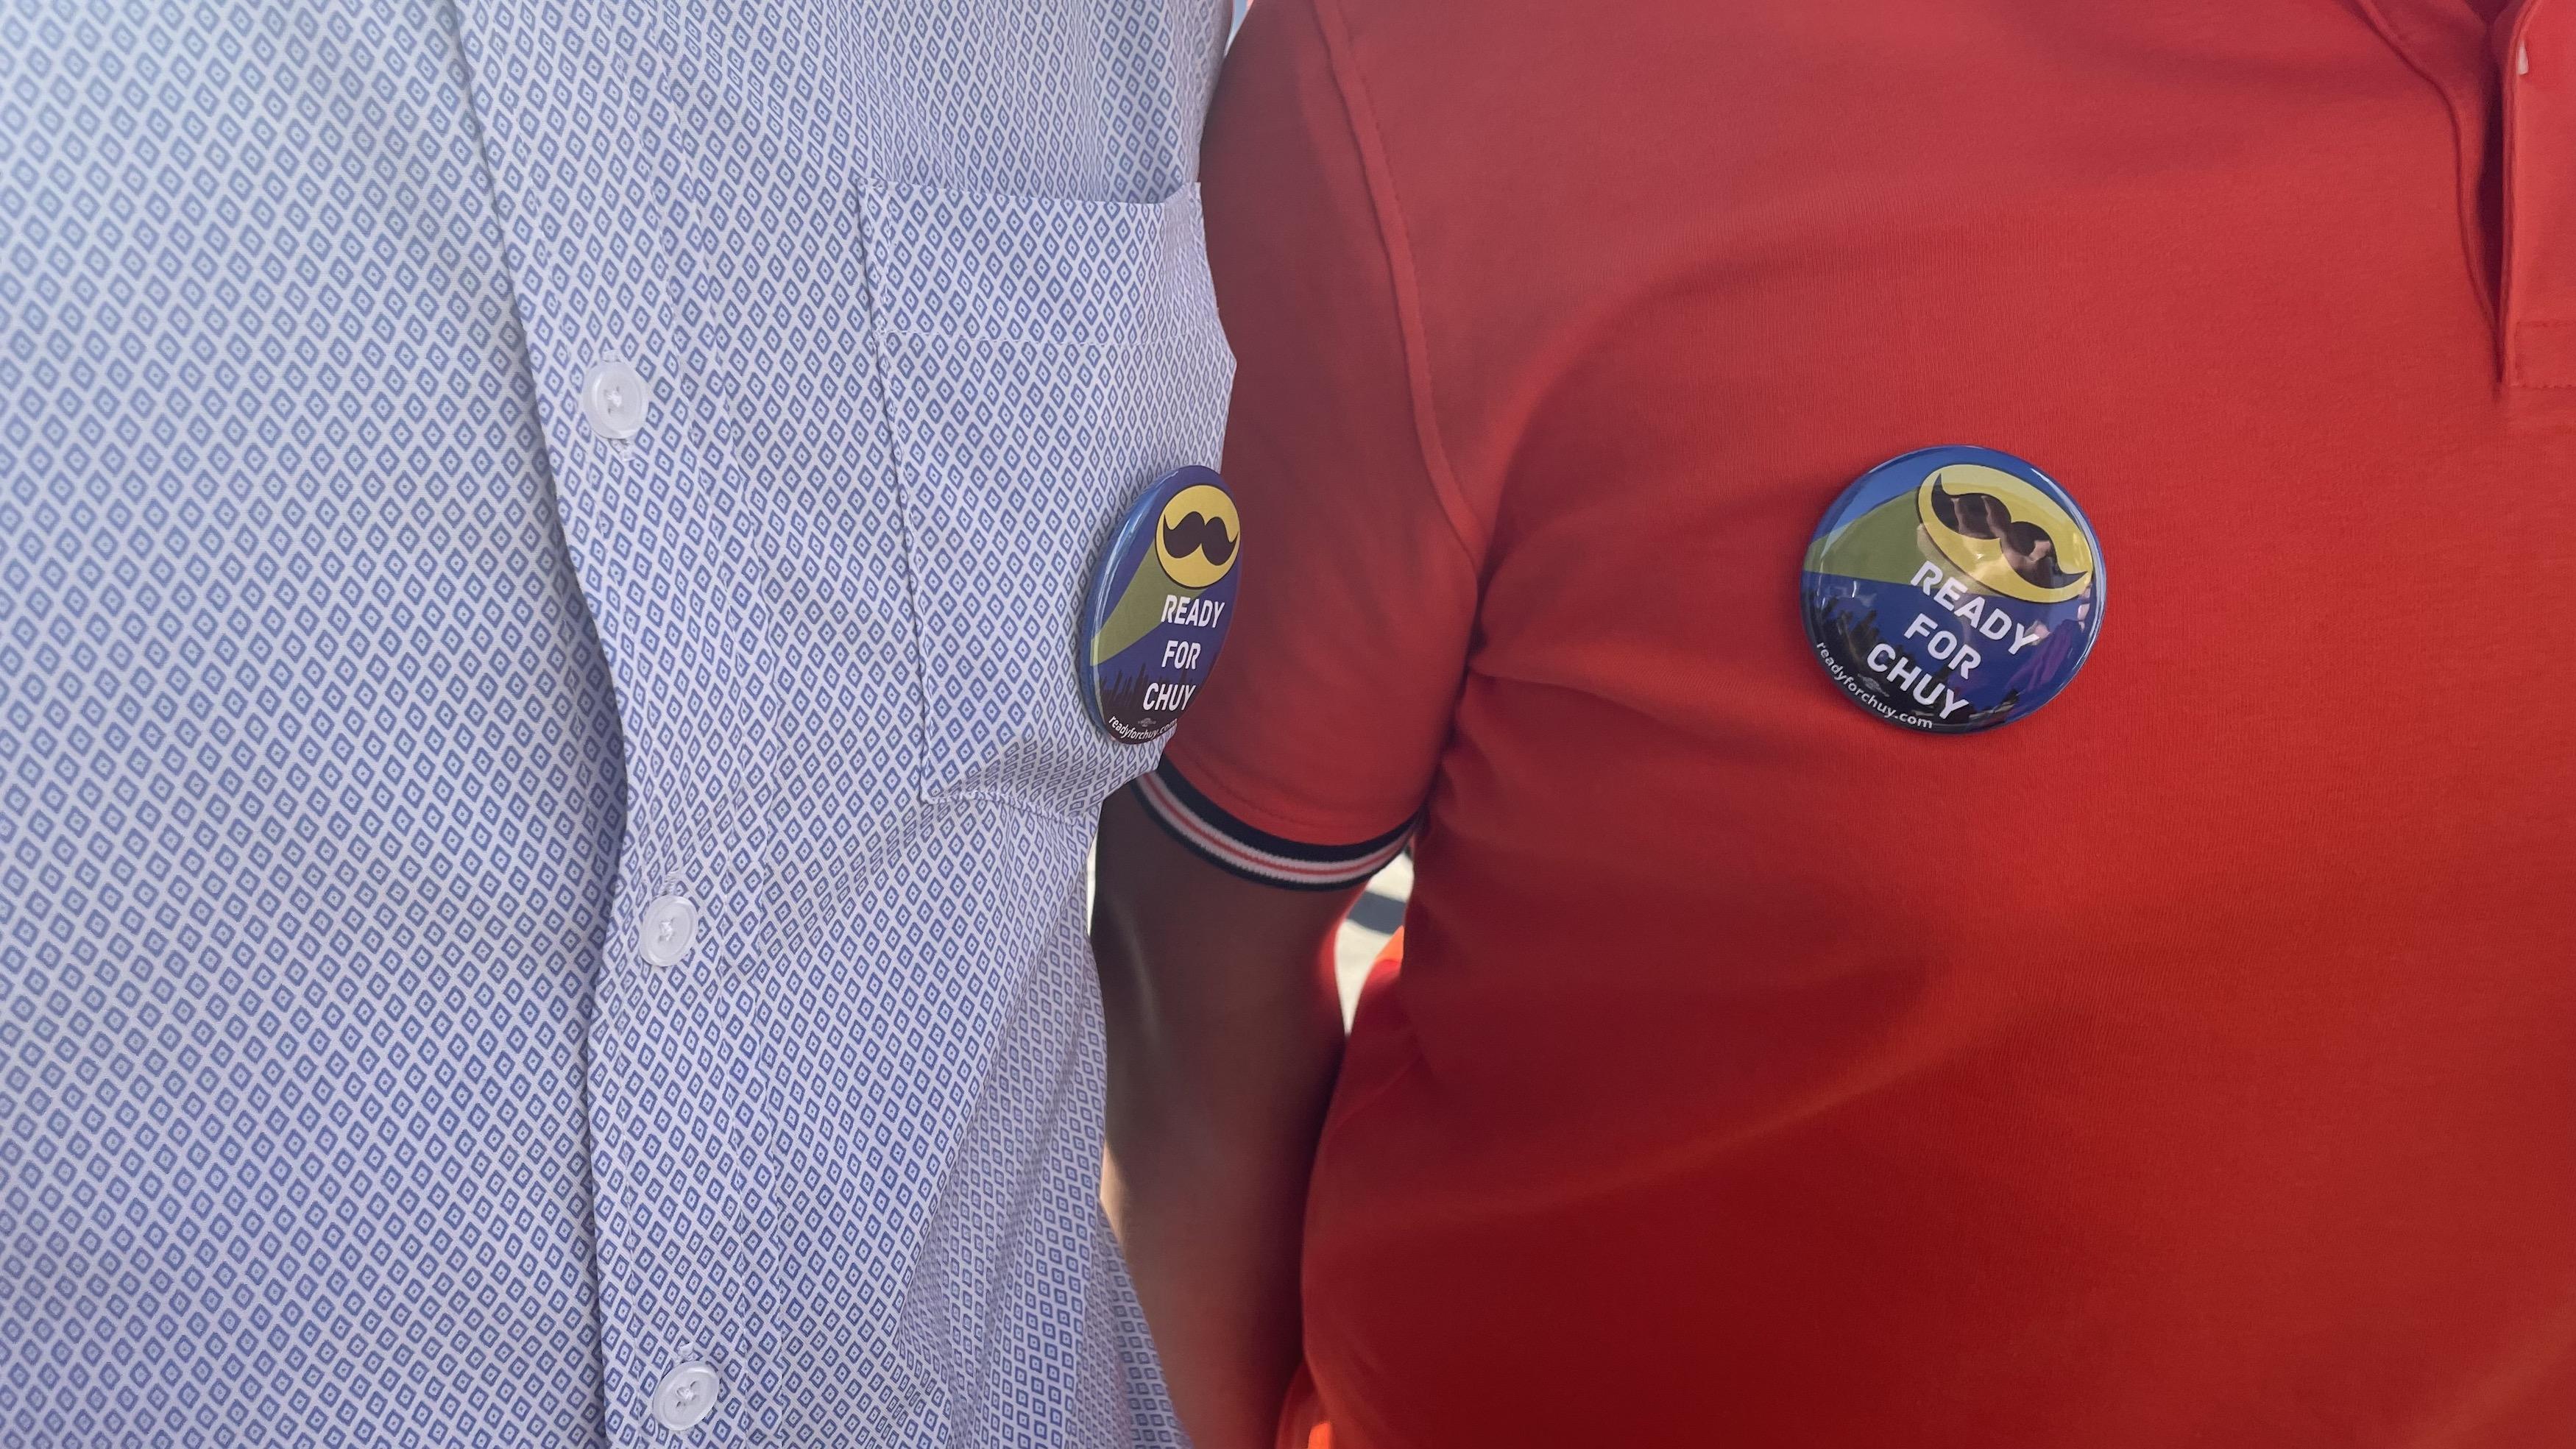 Supporters wearing campaign button's emblazoned with U.S. Rep. Jesus "Chuy" Garcia's famous mustache. (Heather Cherone/WTTW News)